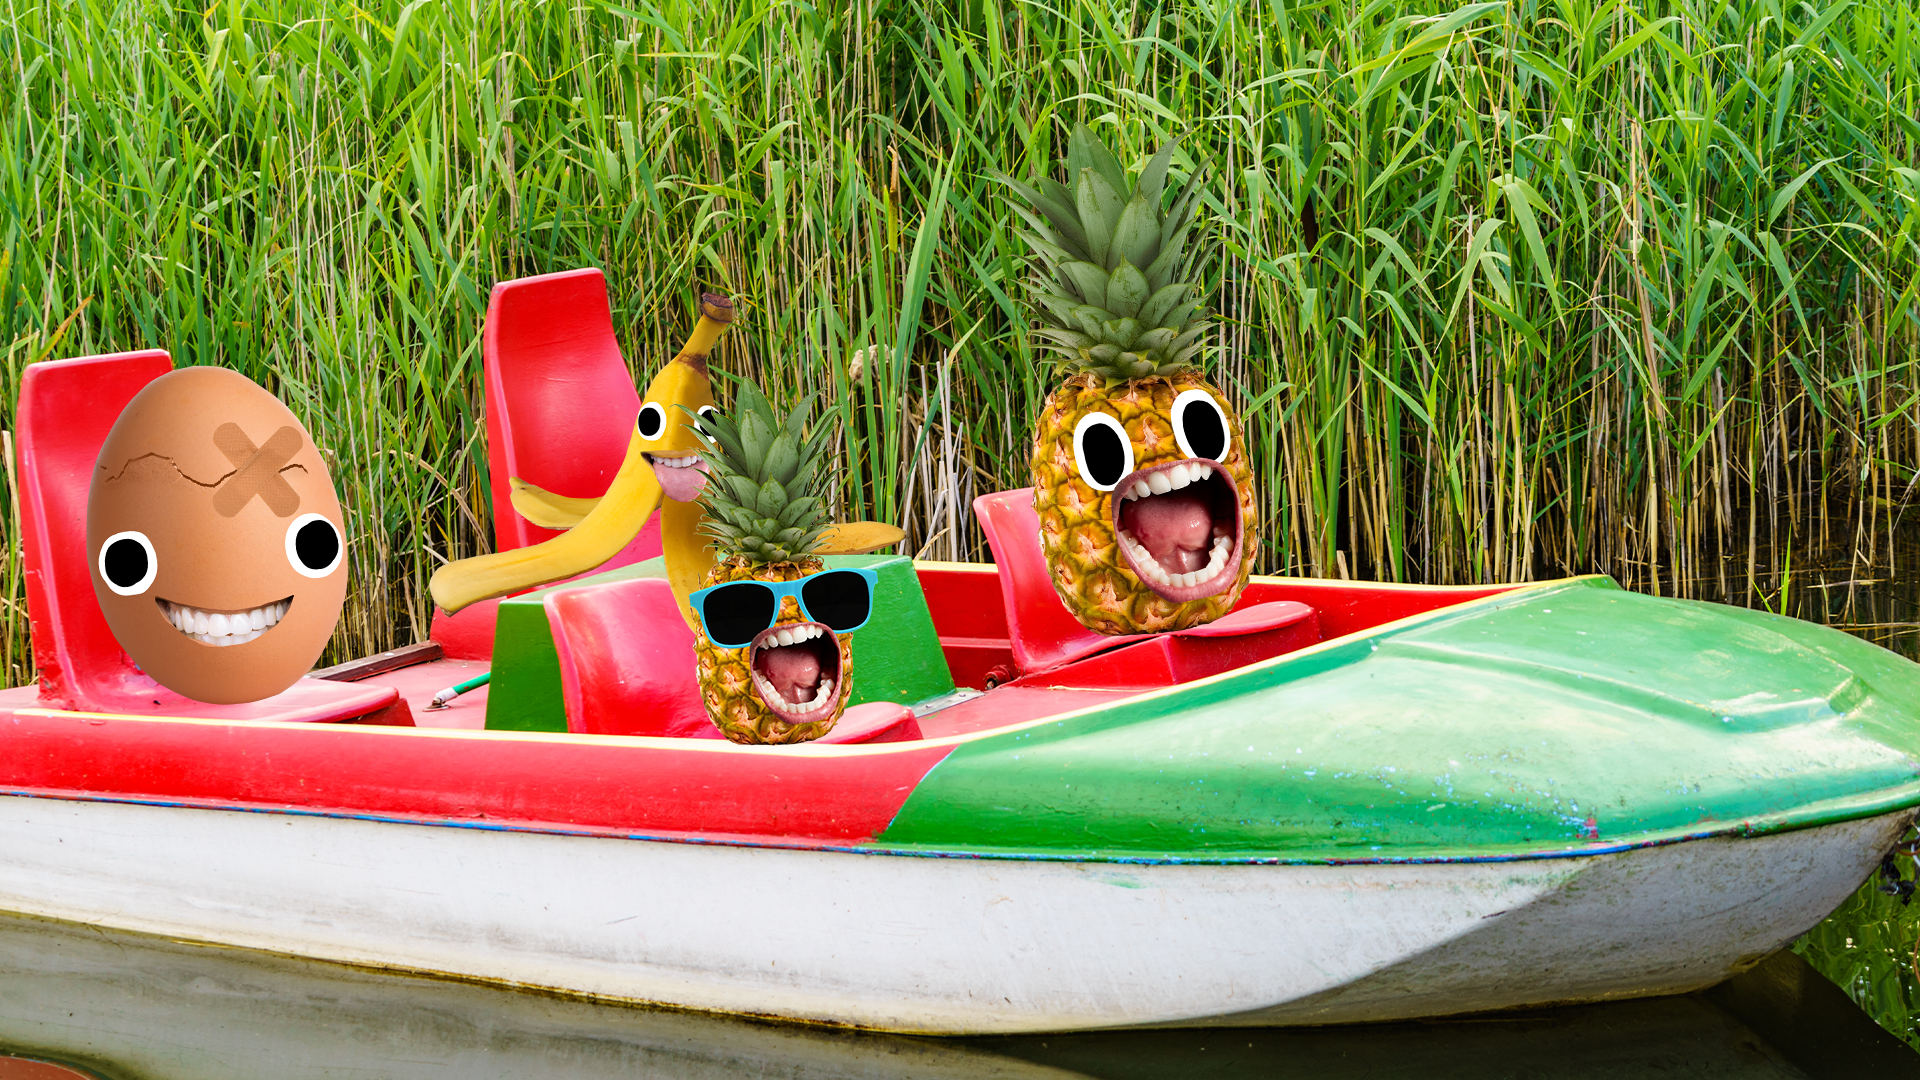 Two pineapples, a banana and an egg in a small pedalo 